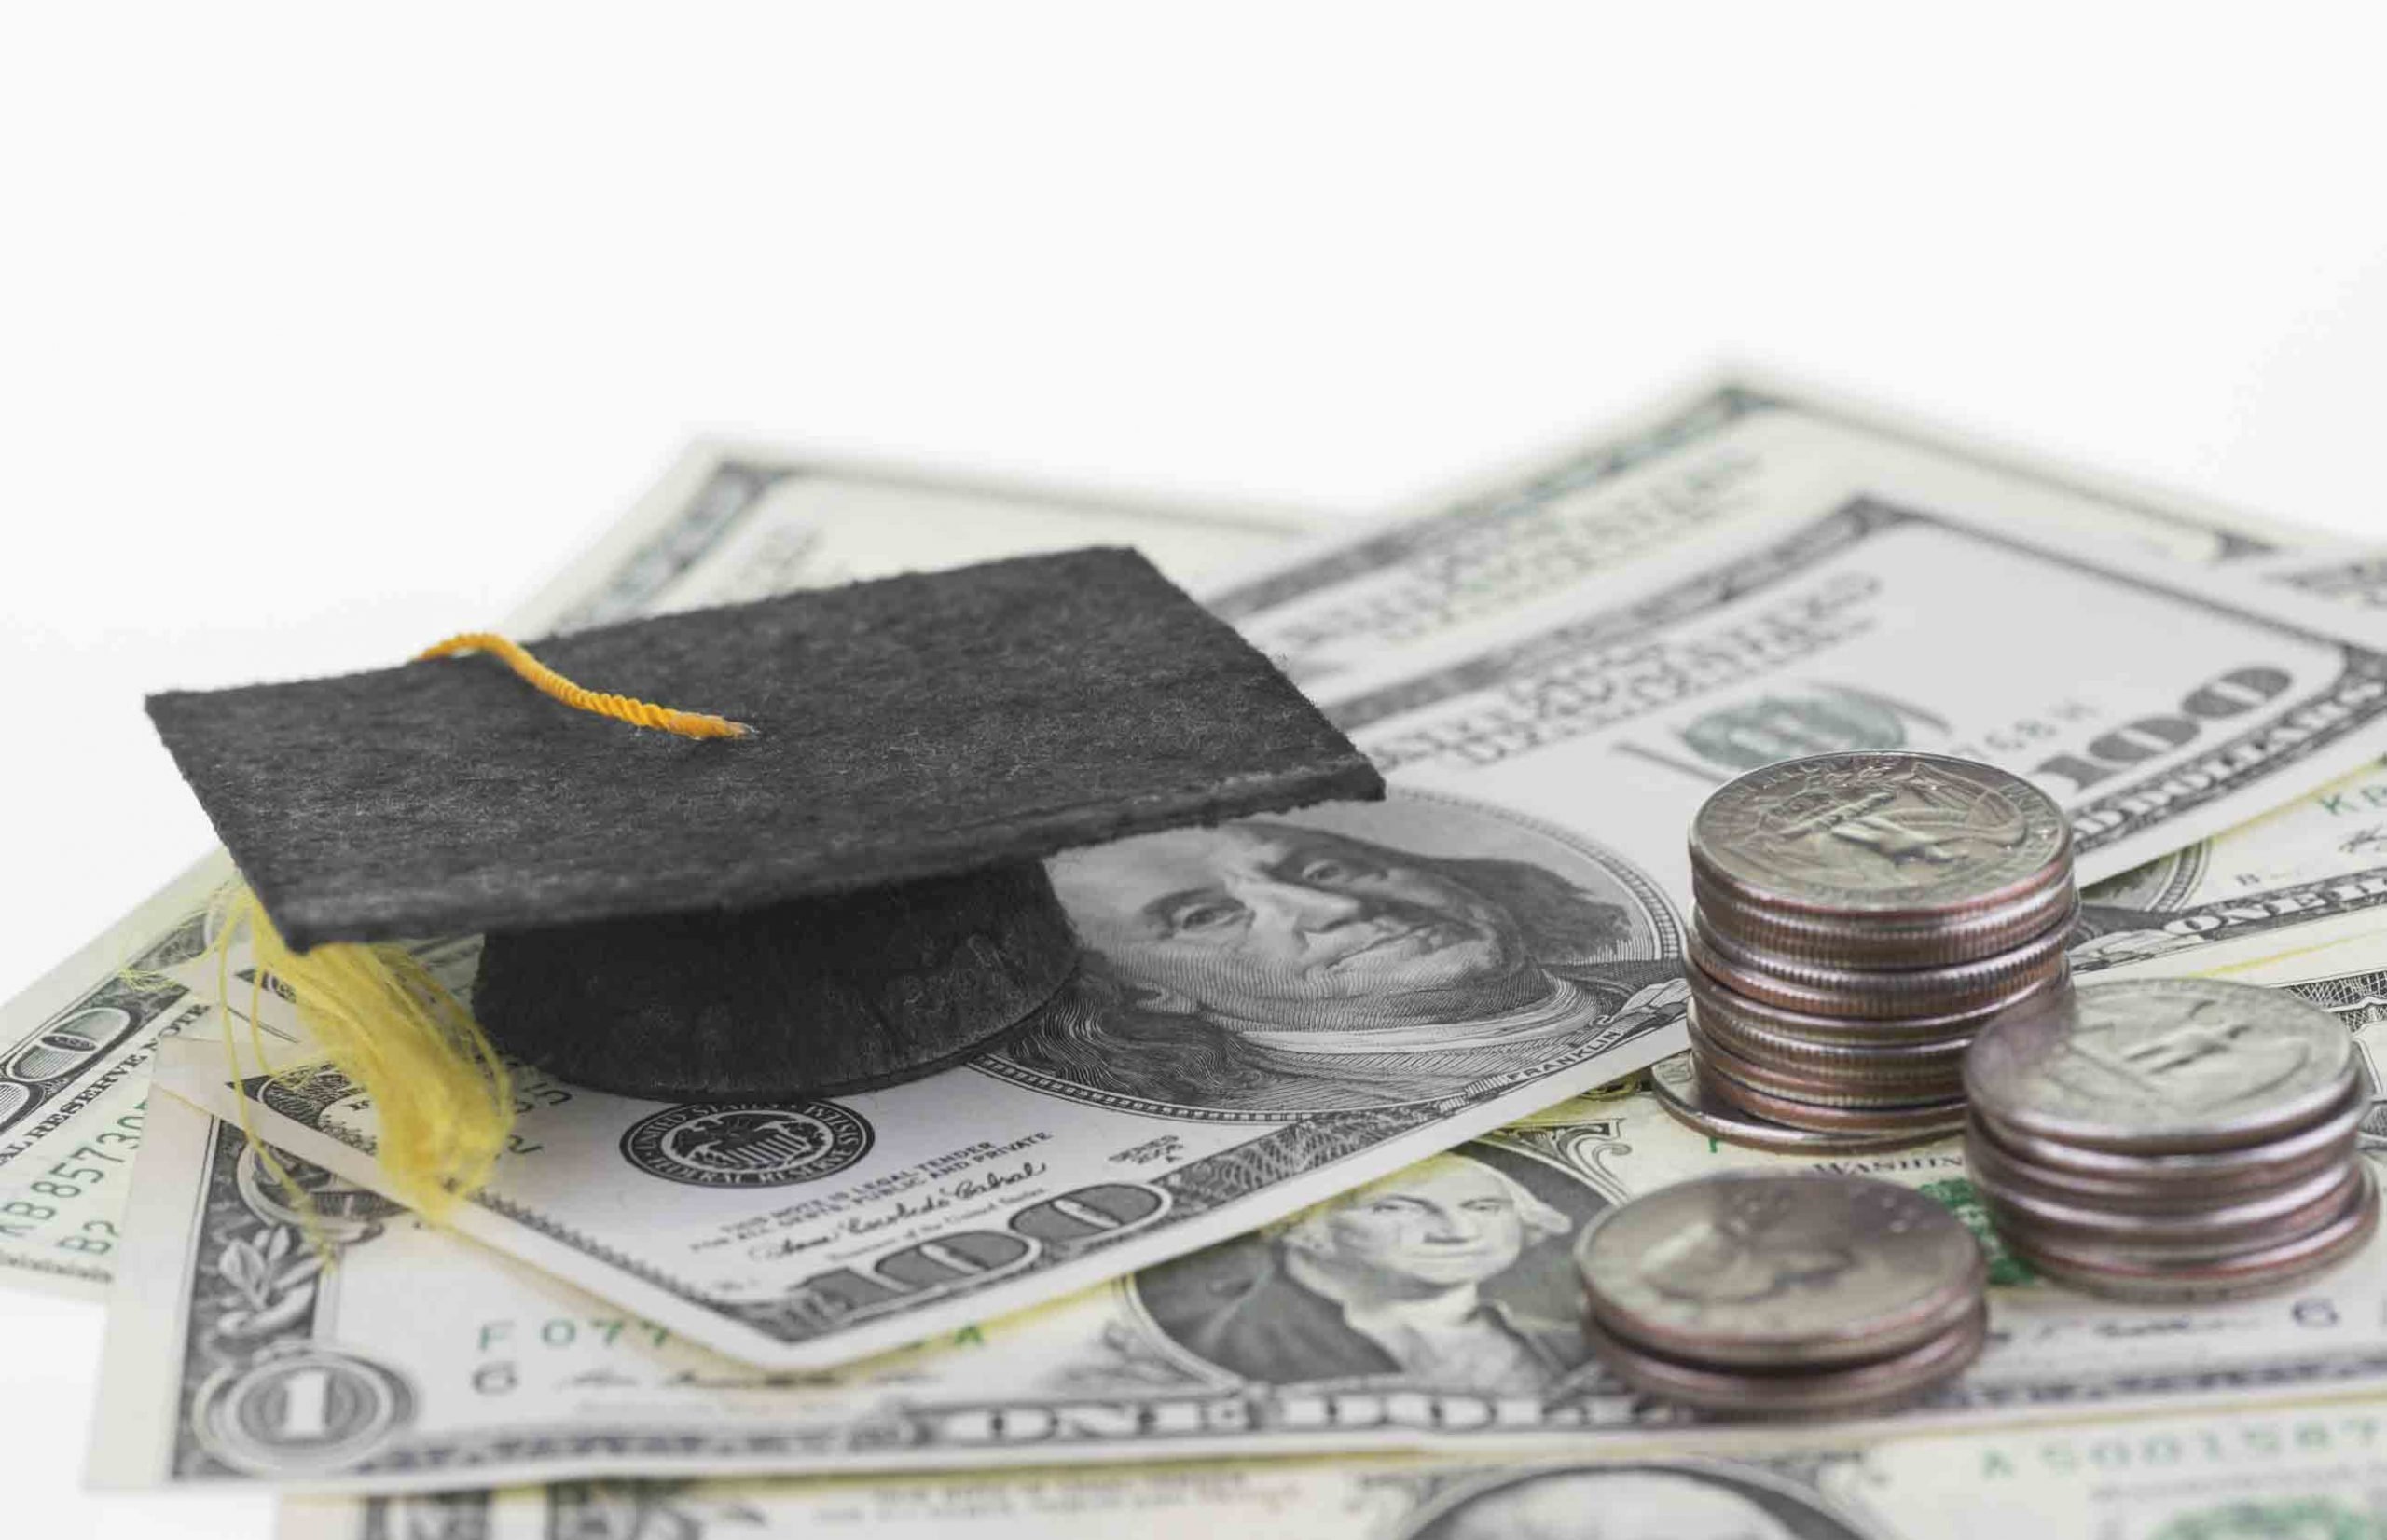 How Soon Can I Refinance My Student Loans?